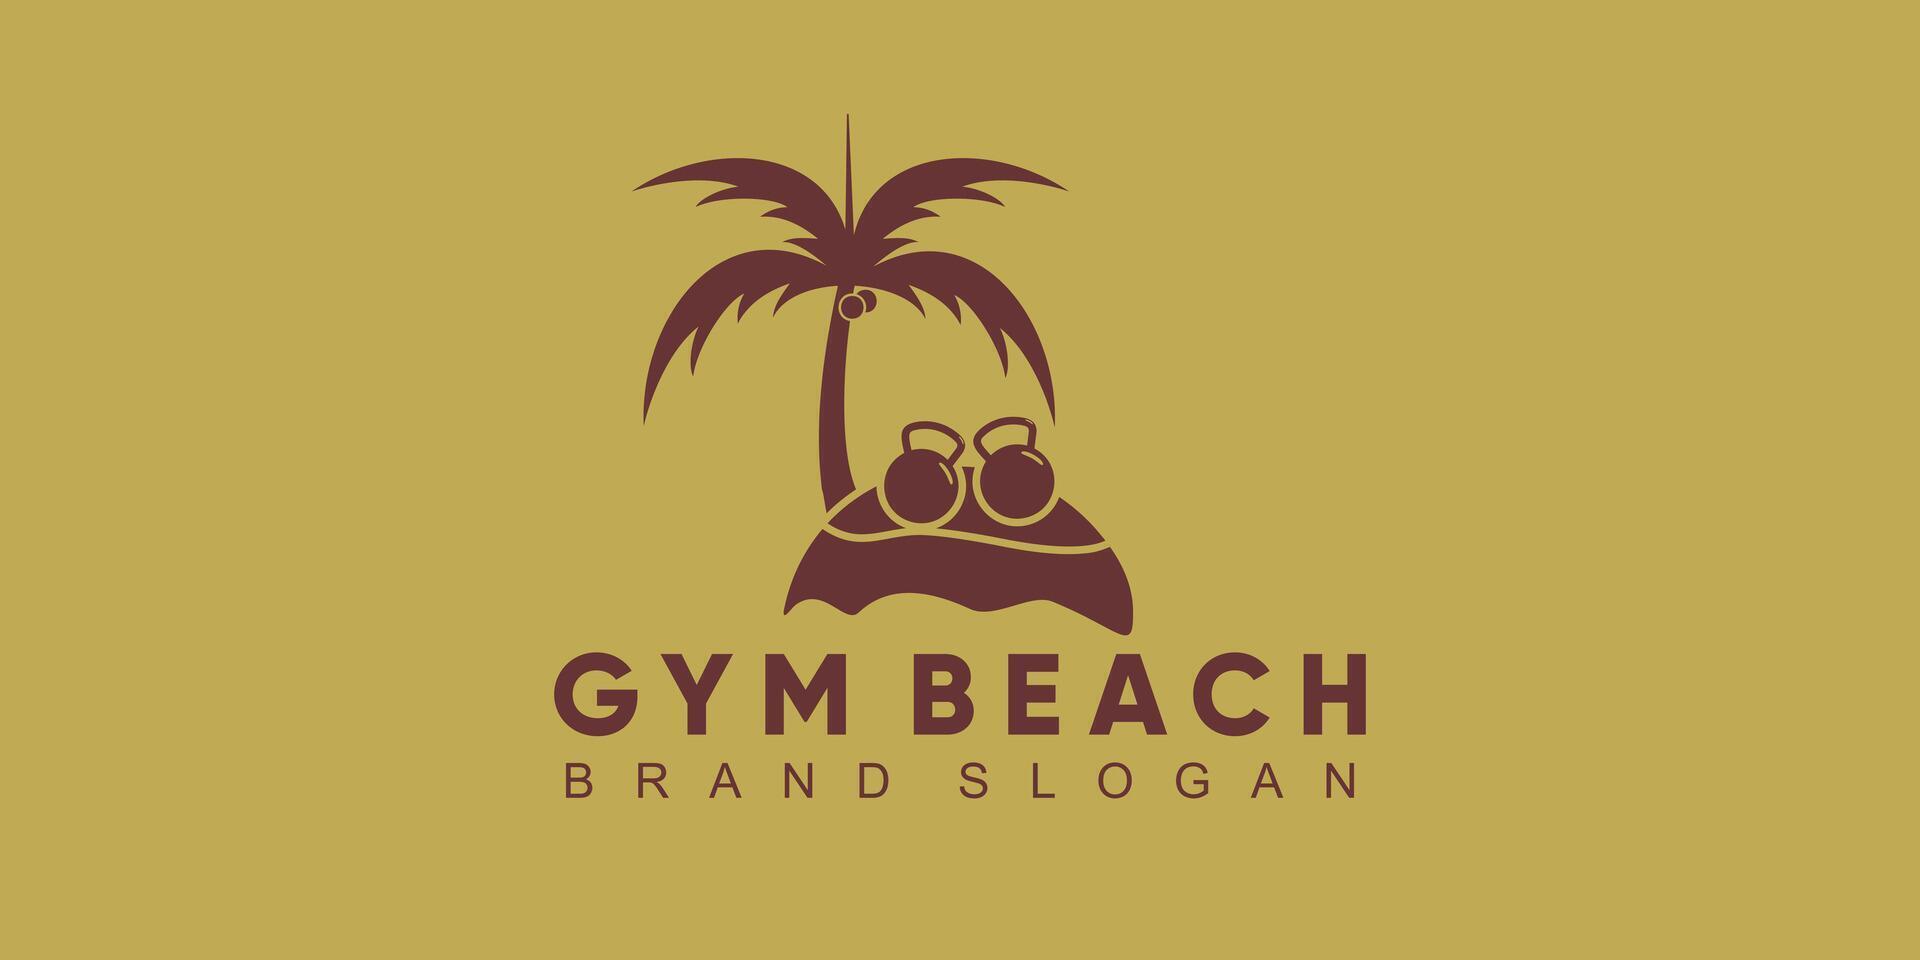 Gym Beach  logo with palm shape and barble symbol vector